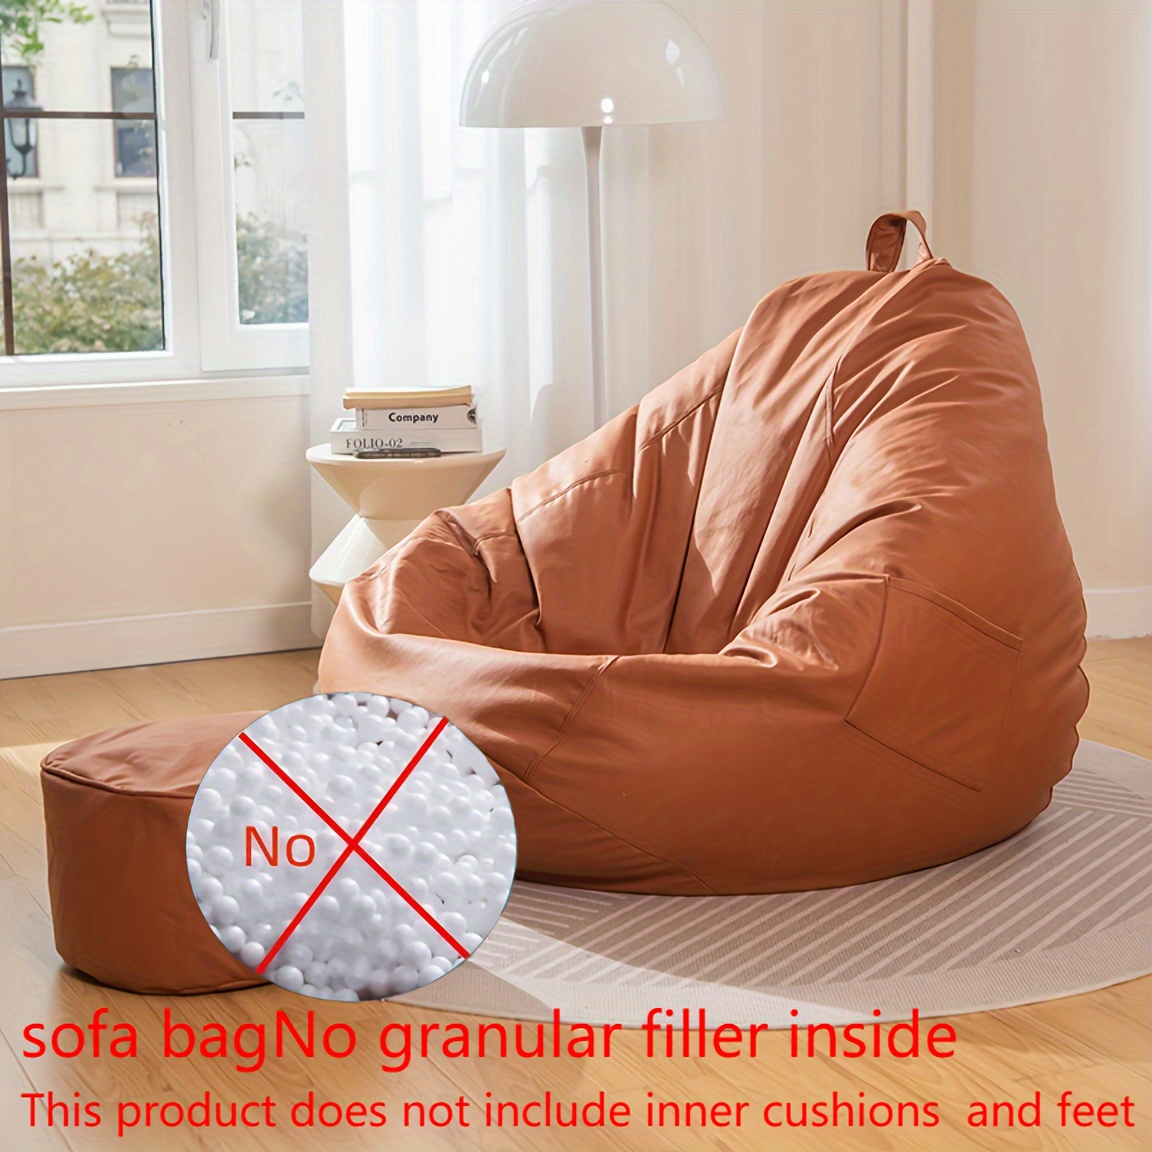 INS Giant Bean Bag Sofa Chair Cotton Linen Lazy Sofa Couch Recliner Floor  Seat Tatami Puff